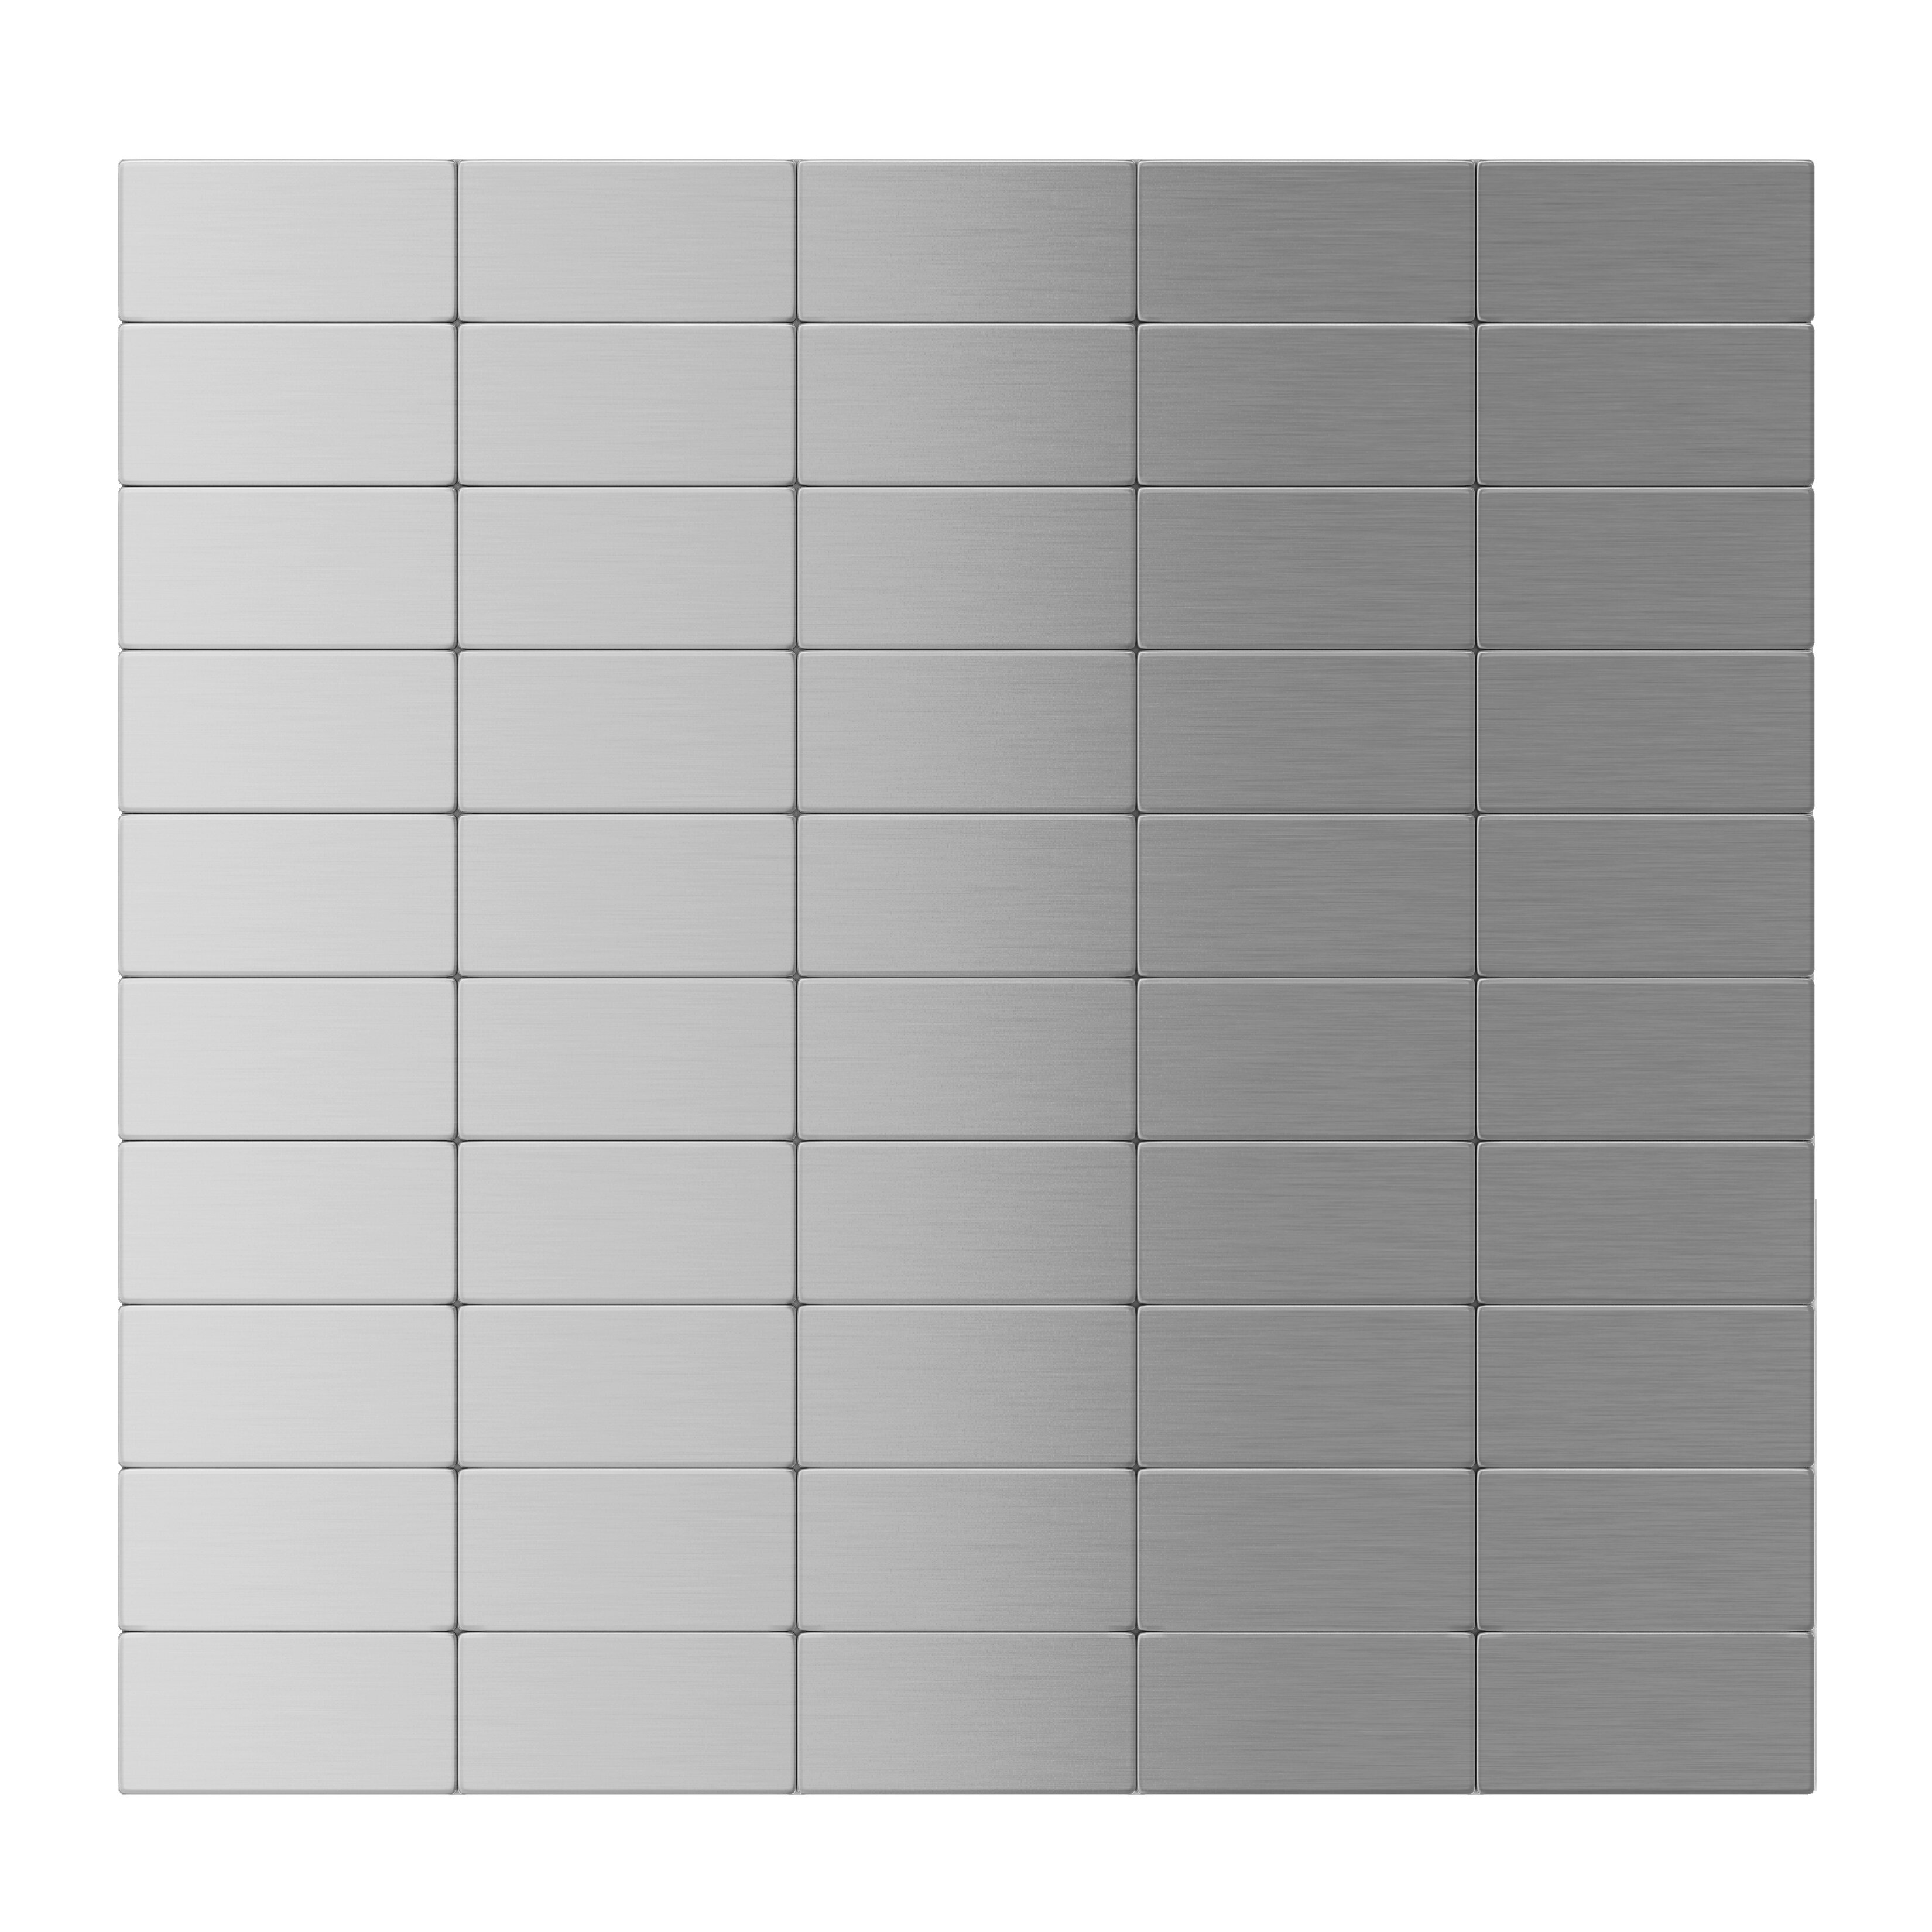 SpeedTiles Subway Peel and Stick 6-Pack Silver Stainless Steel 12-in x 12-in Brushed Metal Brick Peel-and-Stick Wall Tile